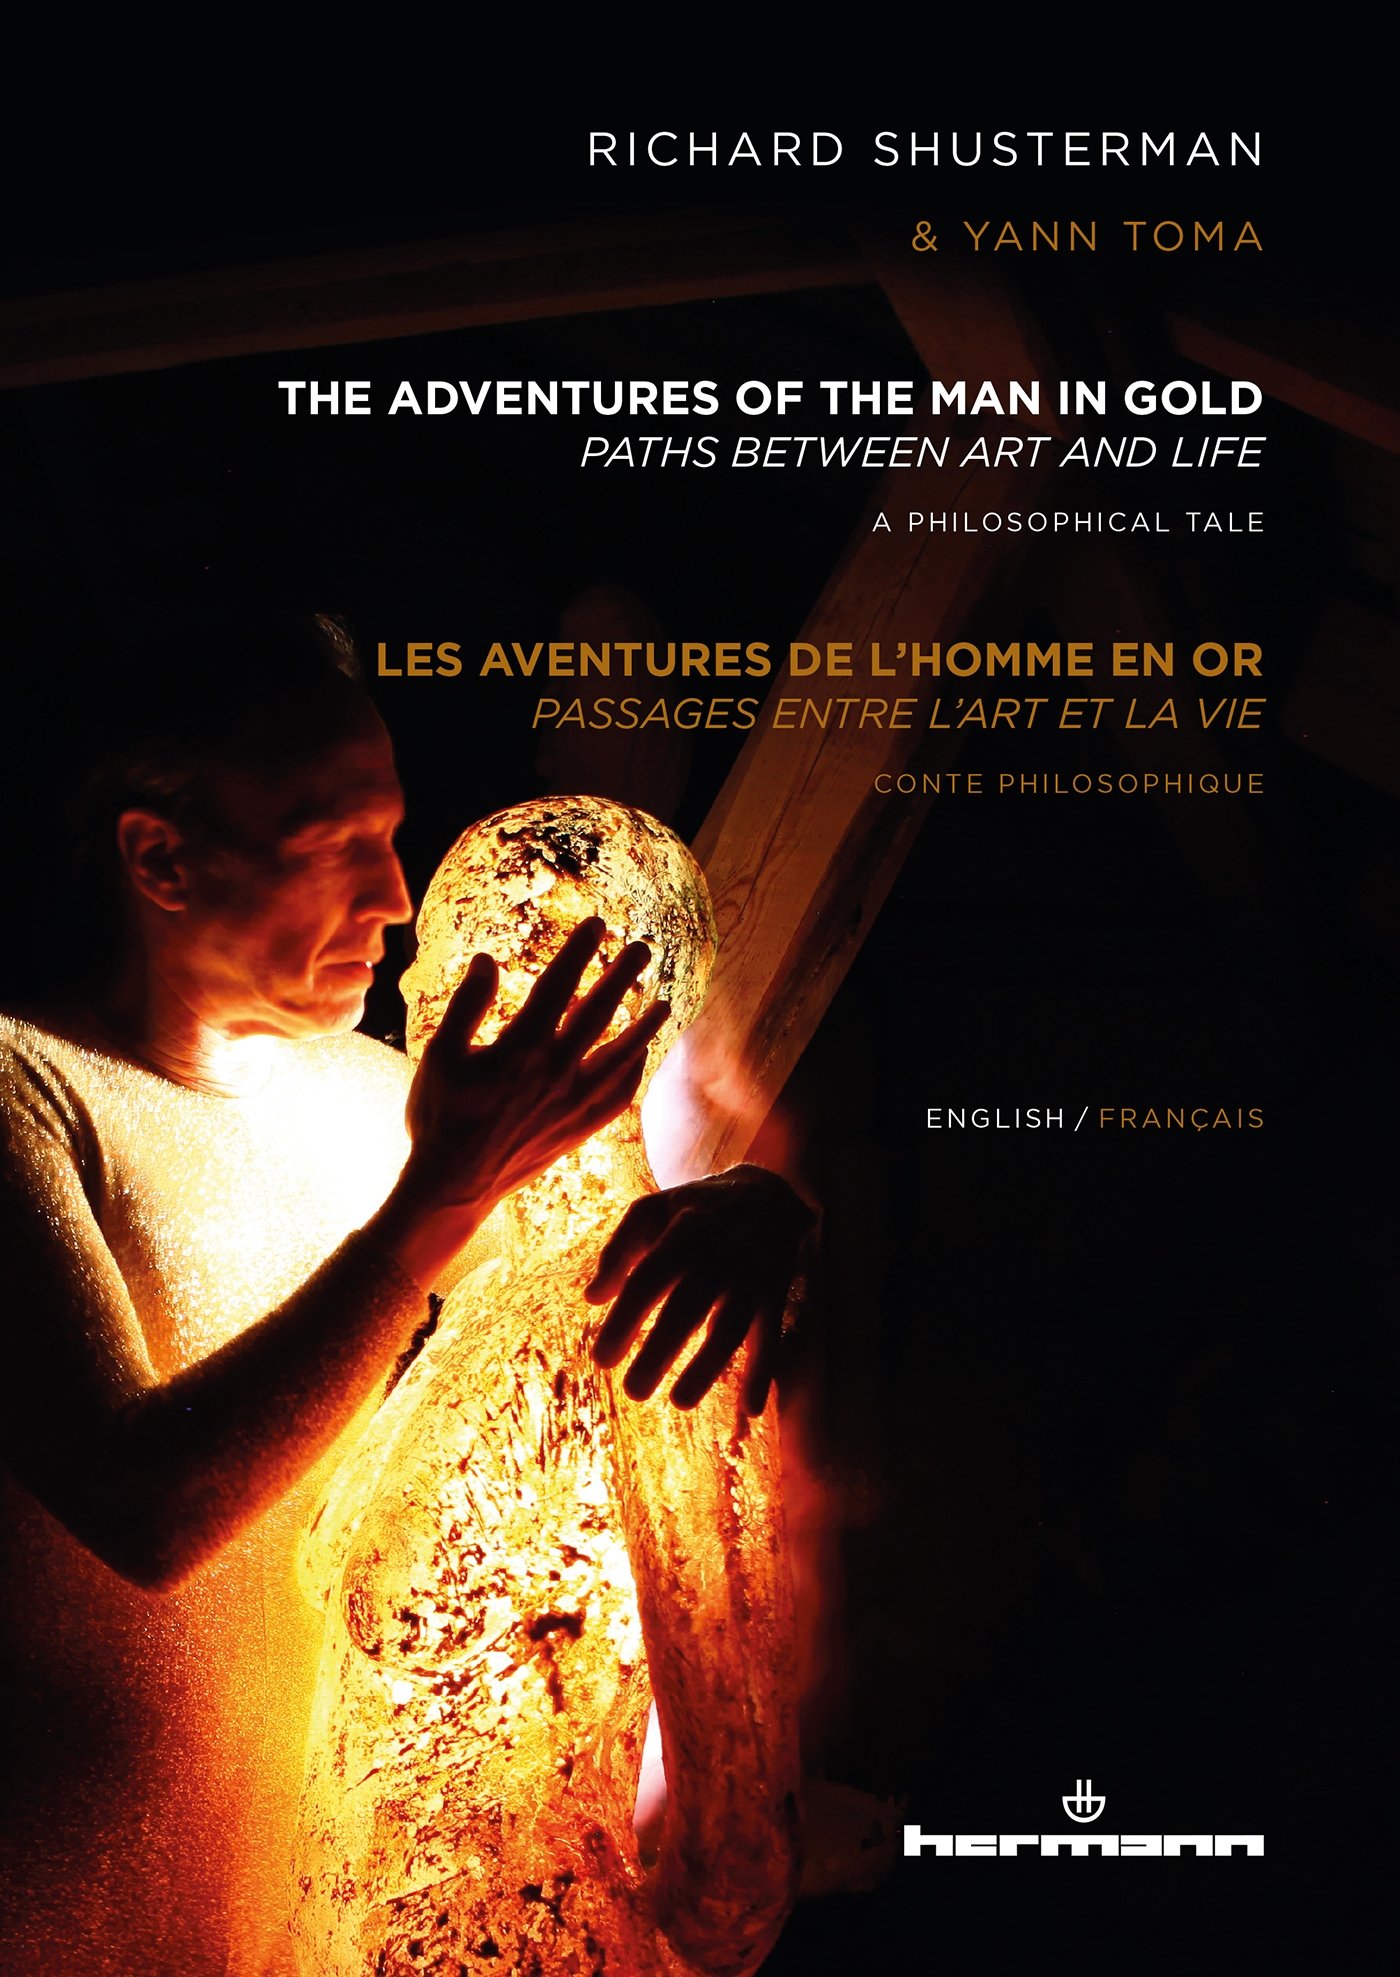 The Adventures of The Man in Gold